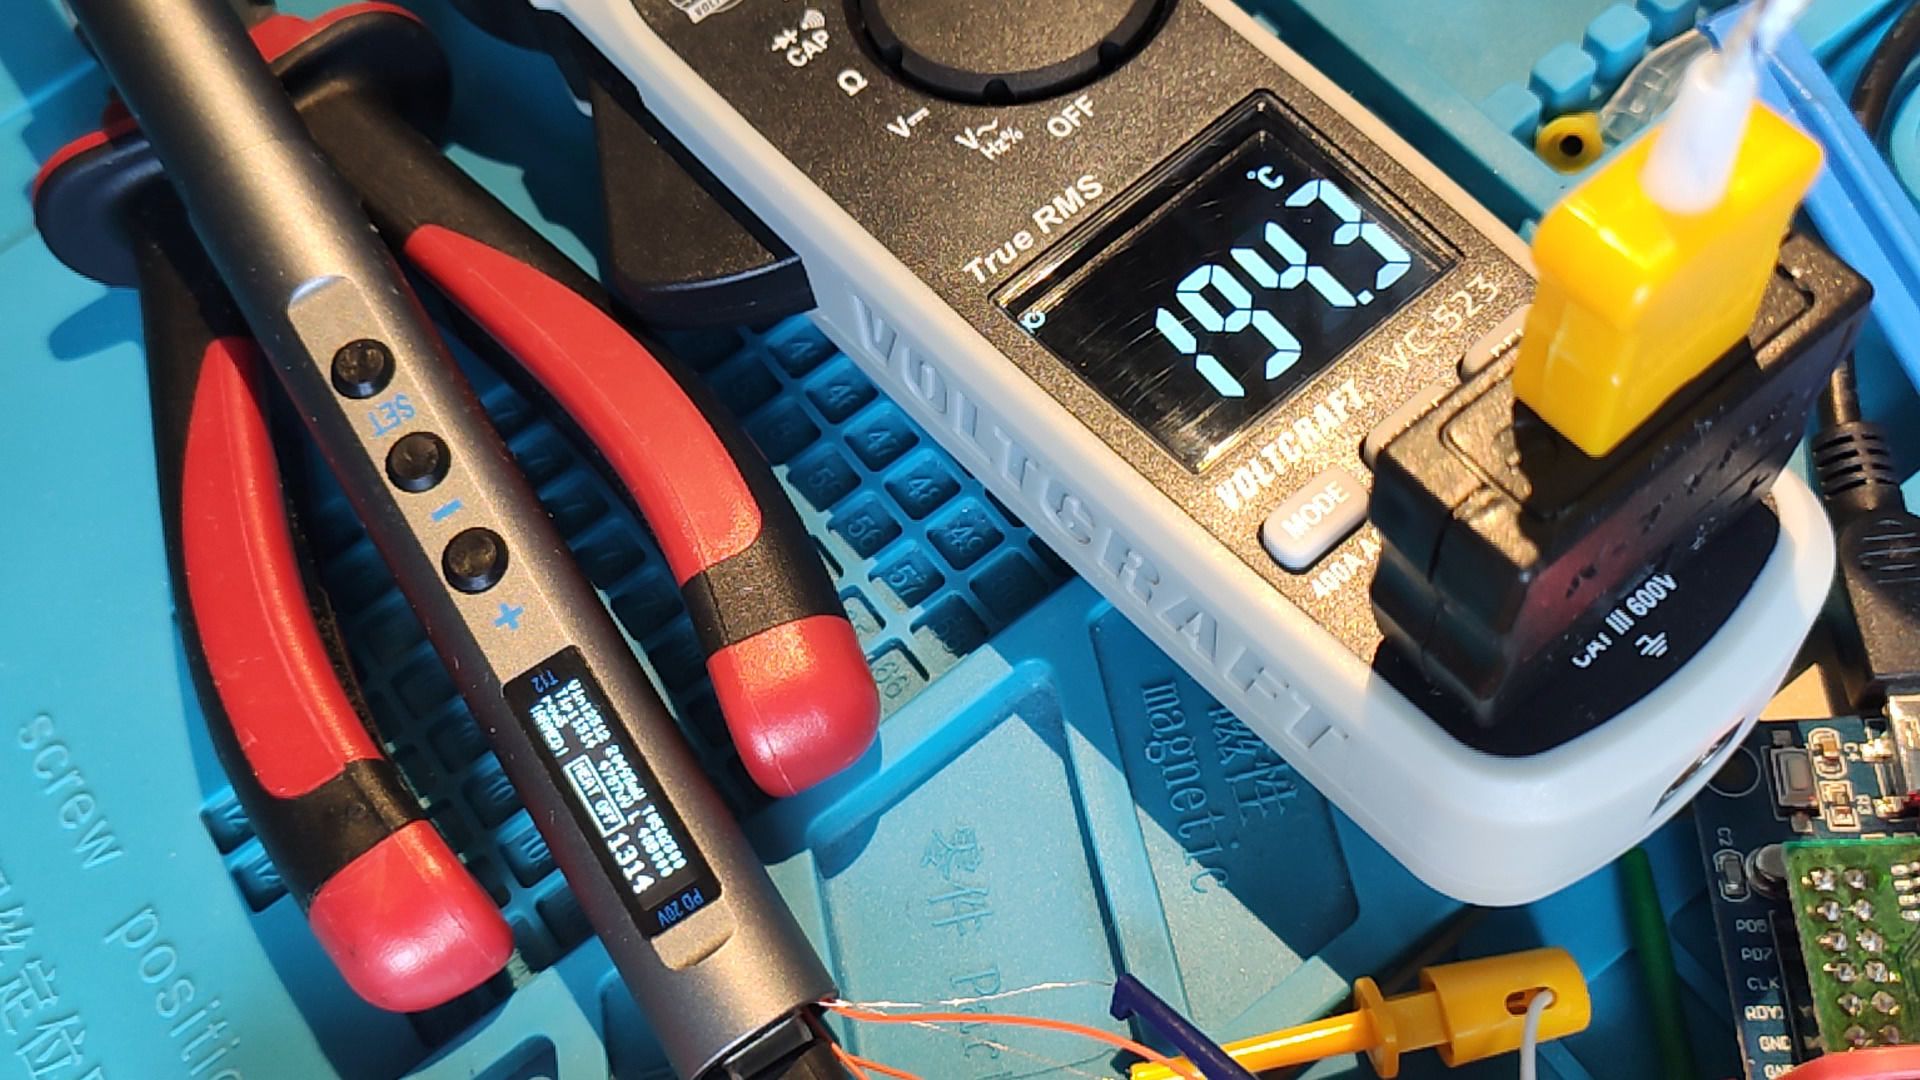 Multimeter and soldering iron